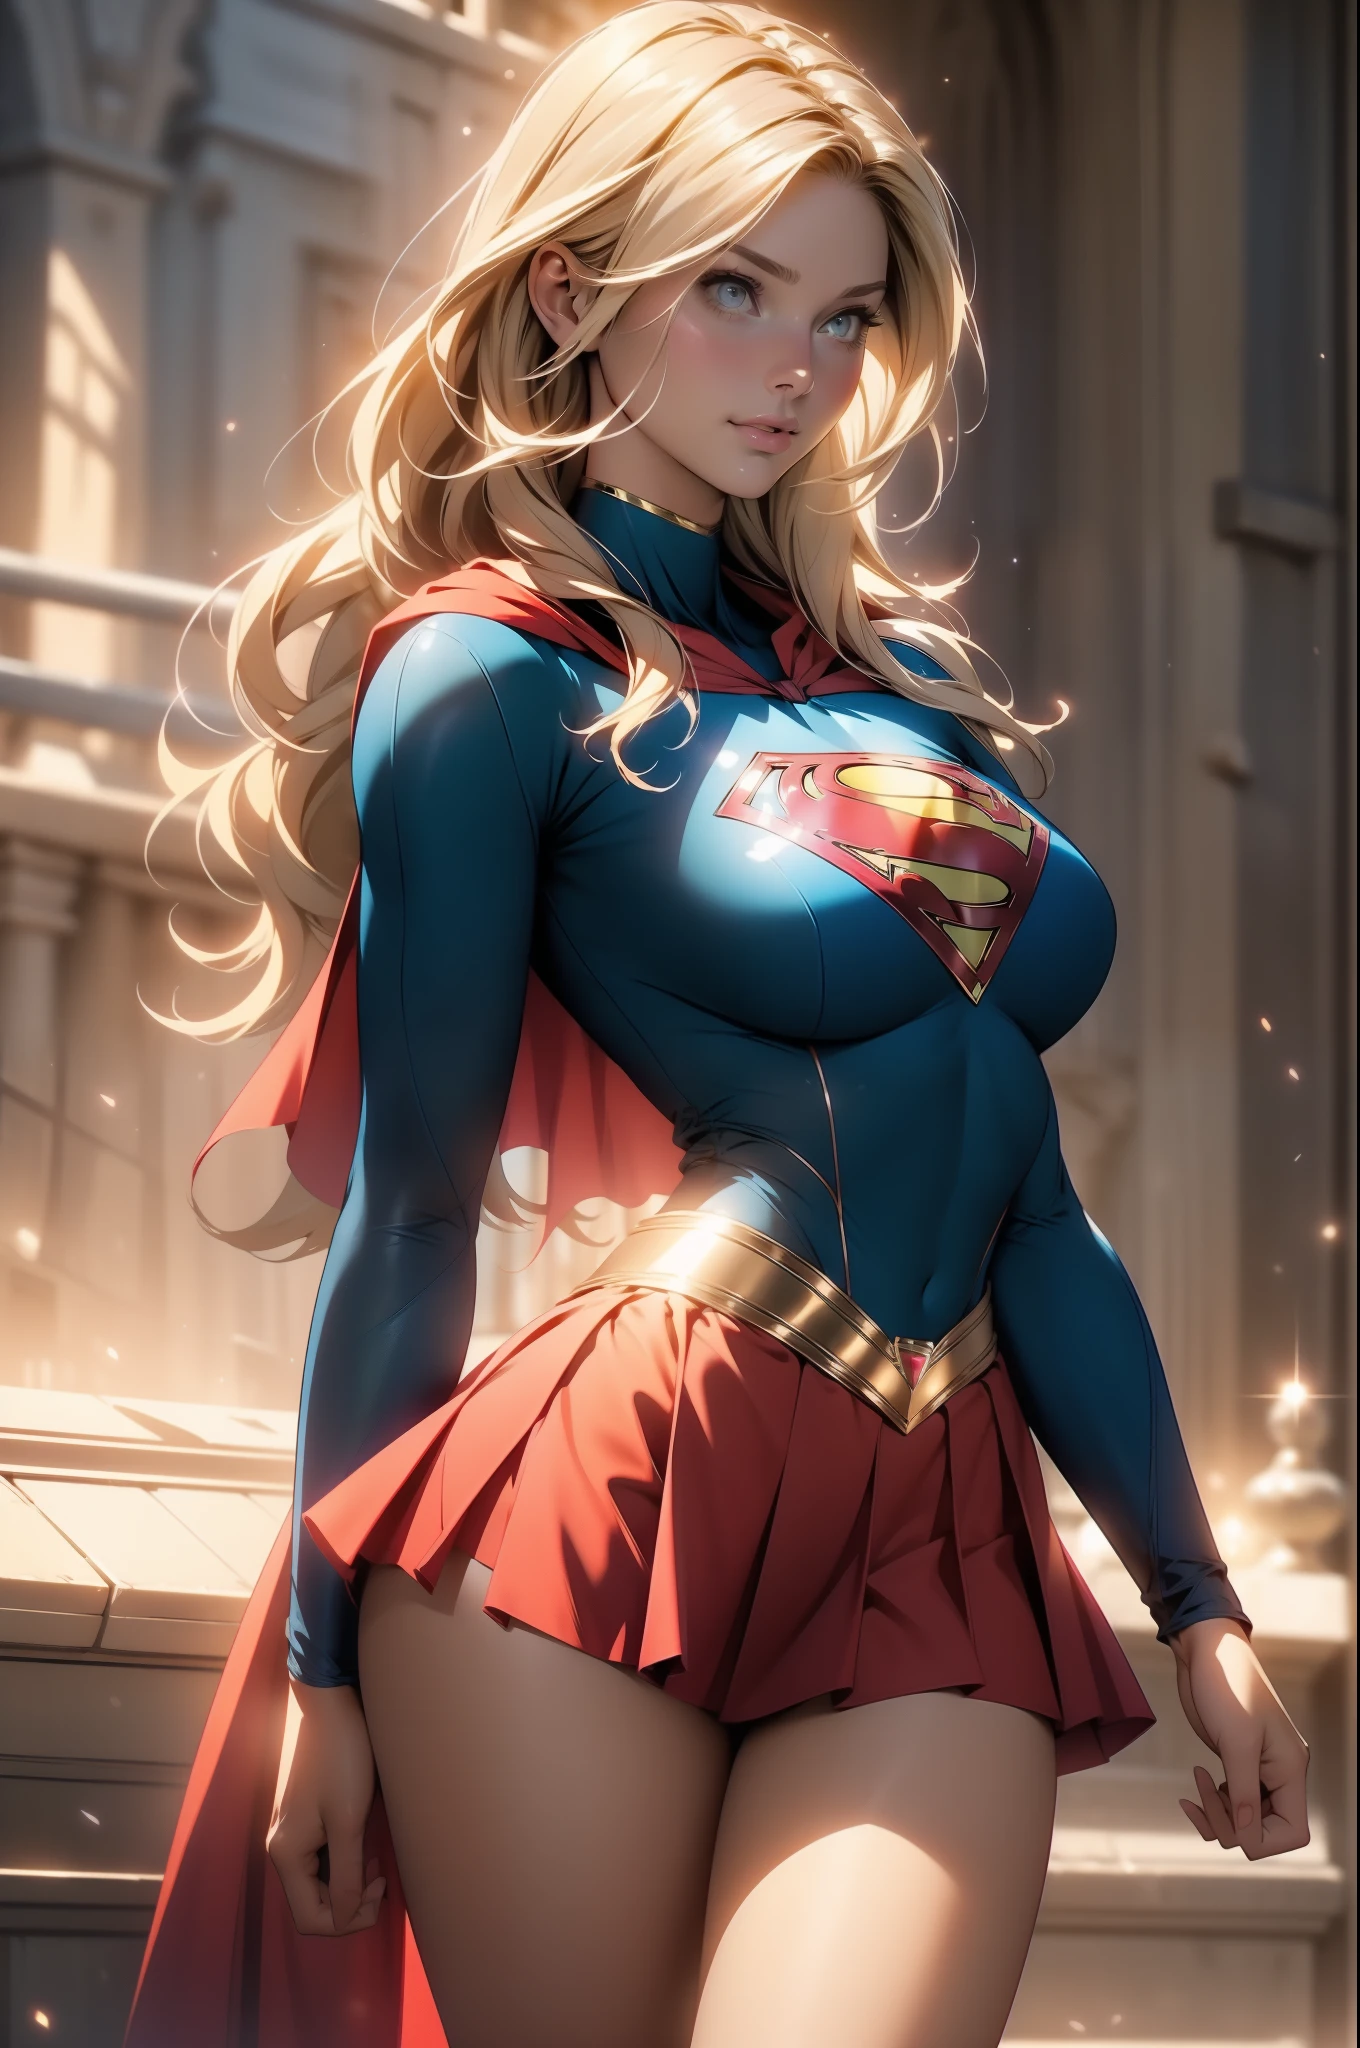 nsfw: 1.5, masterpiece, best quality, high quality, high definition, high quality textures, high quality shadows, high definition, beautiful detail, highly detailed CG, detailed textures, realistic representation of faces, realistic, colorful, delicate , cinematic lights, side lights, lens flares, ray tracing, sharp focus, supergirl, ((best quality, masterpiece, absurd, 8k)), 1 girl, solo, 21 years old,Supergirl(Helen Slater), huge breasts, huge breasts, long hair down to her hips, long hair,low hair, voluminous hair, white skin tone, green eyes, sparkling expressive eyes, huge breasts, she is supergirl, Supergirl  , japanese sailor  female  Supergirl, costume female school,stocking 7/8 ,superman suit, blushing, embarrassed expression, shy smile, building terrace, daytime, pretty, young woman, hands behind) (1girl, __focus__:1.3), (intricate details, makeup , PureErosFace_V1:0.5), (delicate beautiful face with details, Delicate eyes beautiful in details, perfect face proportions, dense skin, ideal proportion of four fingers and one thumb, arms under the chest, huge breasts, miniskirt,upskirt,wide hips, flat upper abdomen , thin, dressed, blonde: 1.3), bed, no hands, perfect eyes, detailed eyes, show midriff, sexy, cleavage